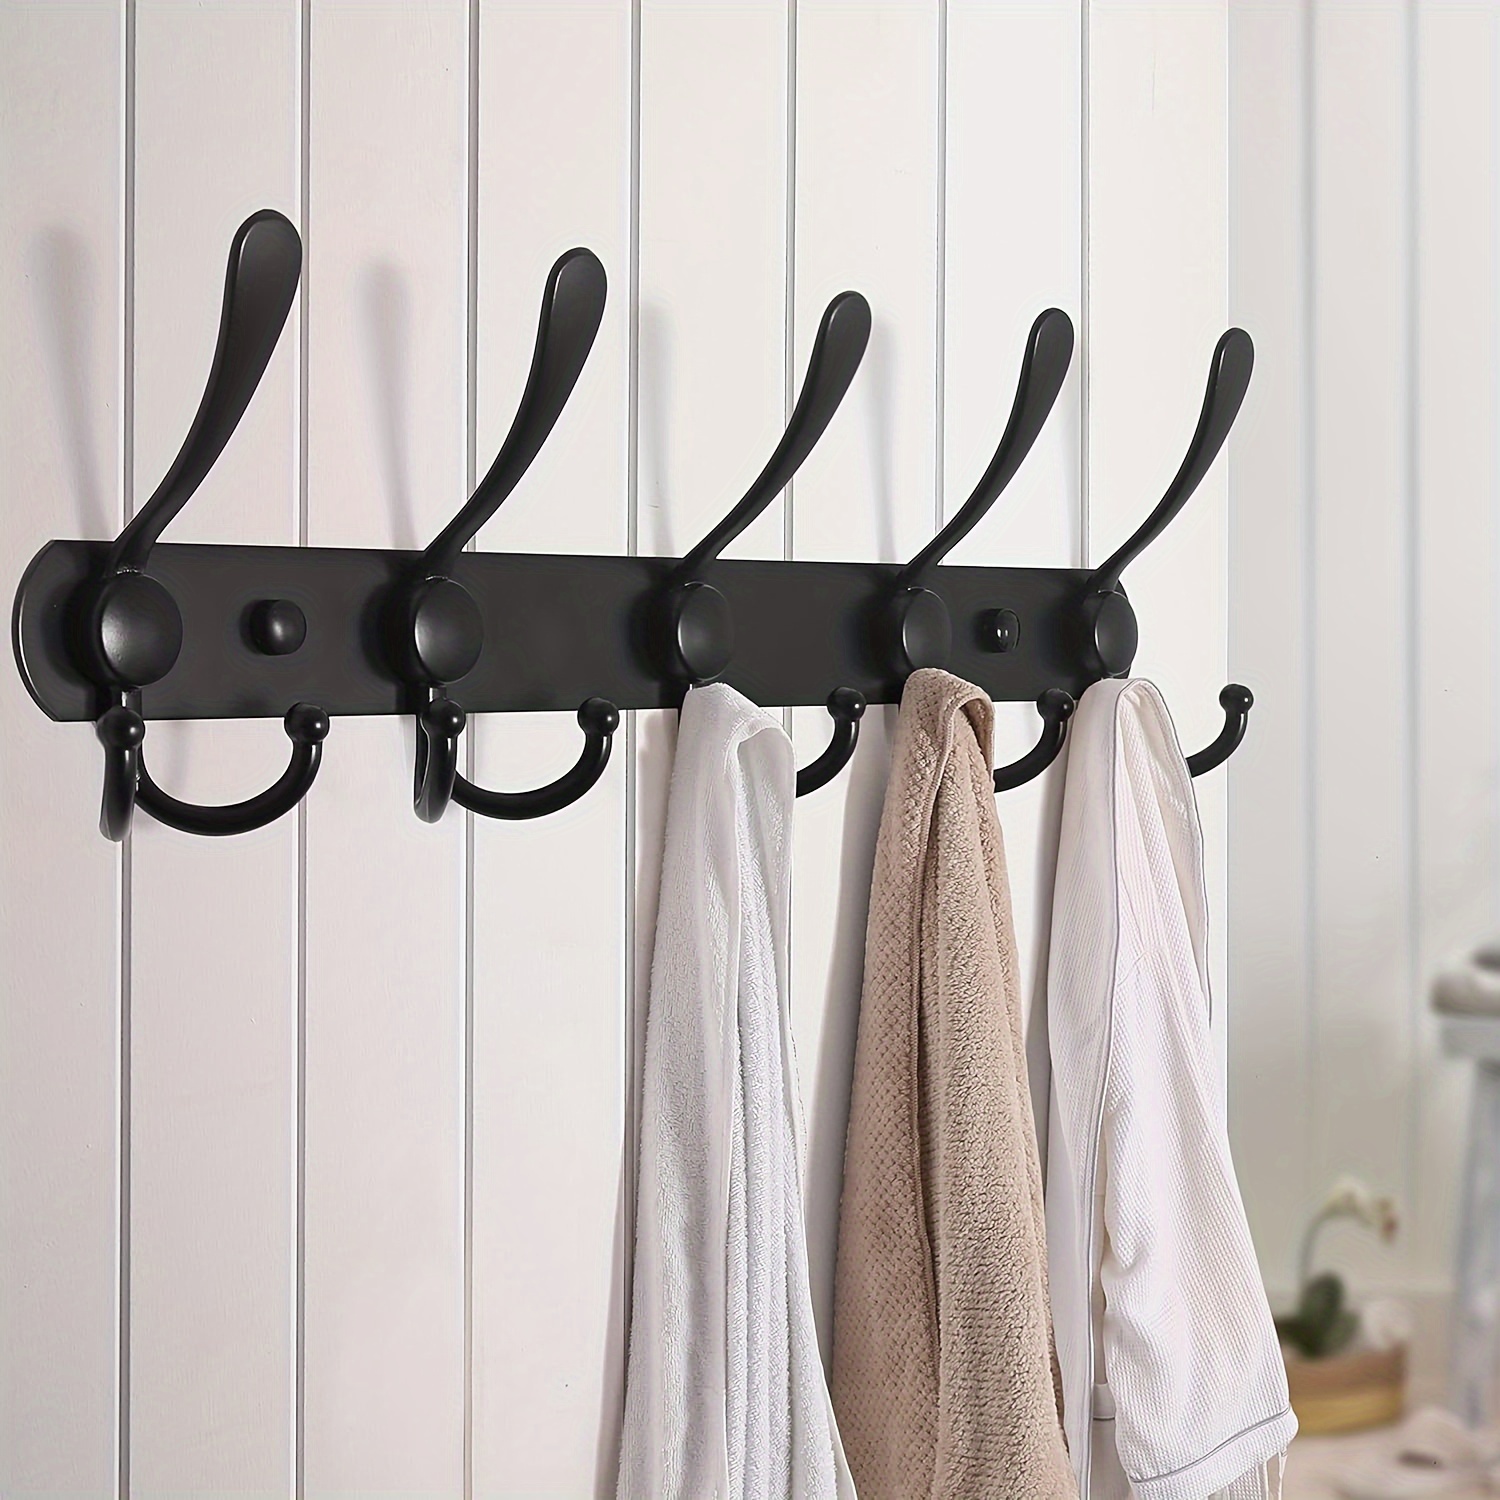 Wooden Wall Hooks Decorative | Adhesive Hooks - Decorative Wall-Mounted  Farmhouse Coat Rack, for Hat Towel Purse Robes Mudroom Bathroom Entryway 通用